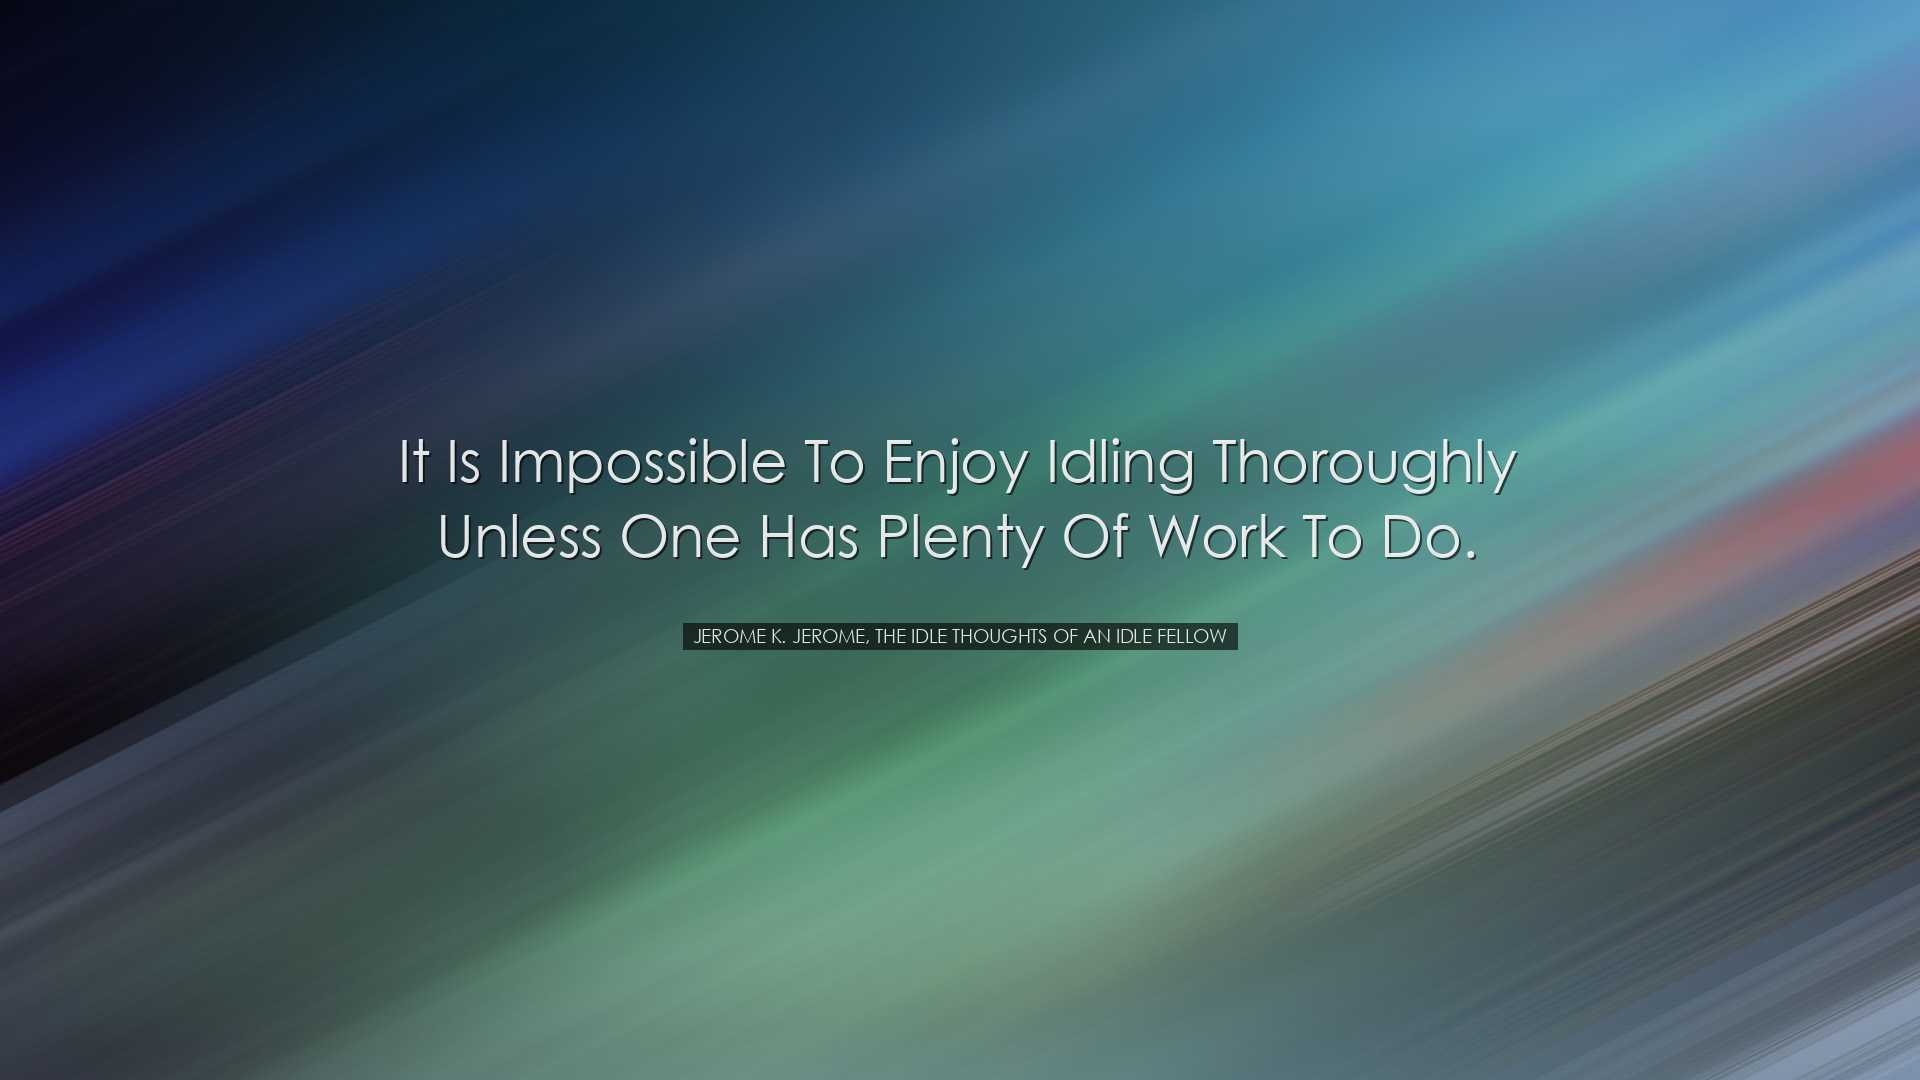 It is impossible to enjoy idling thoroughly unless one has plenty